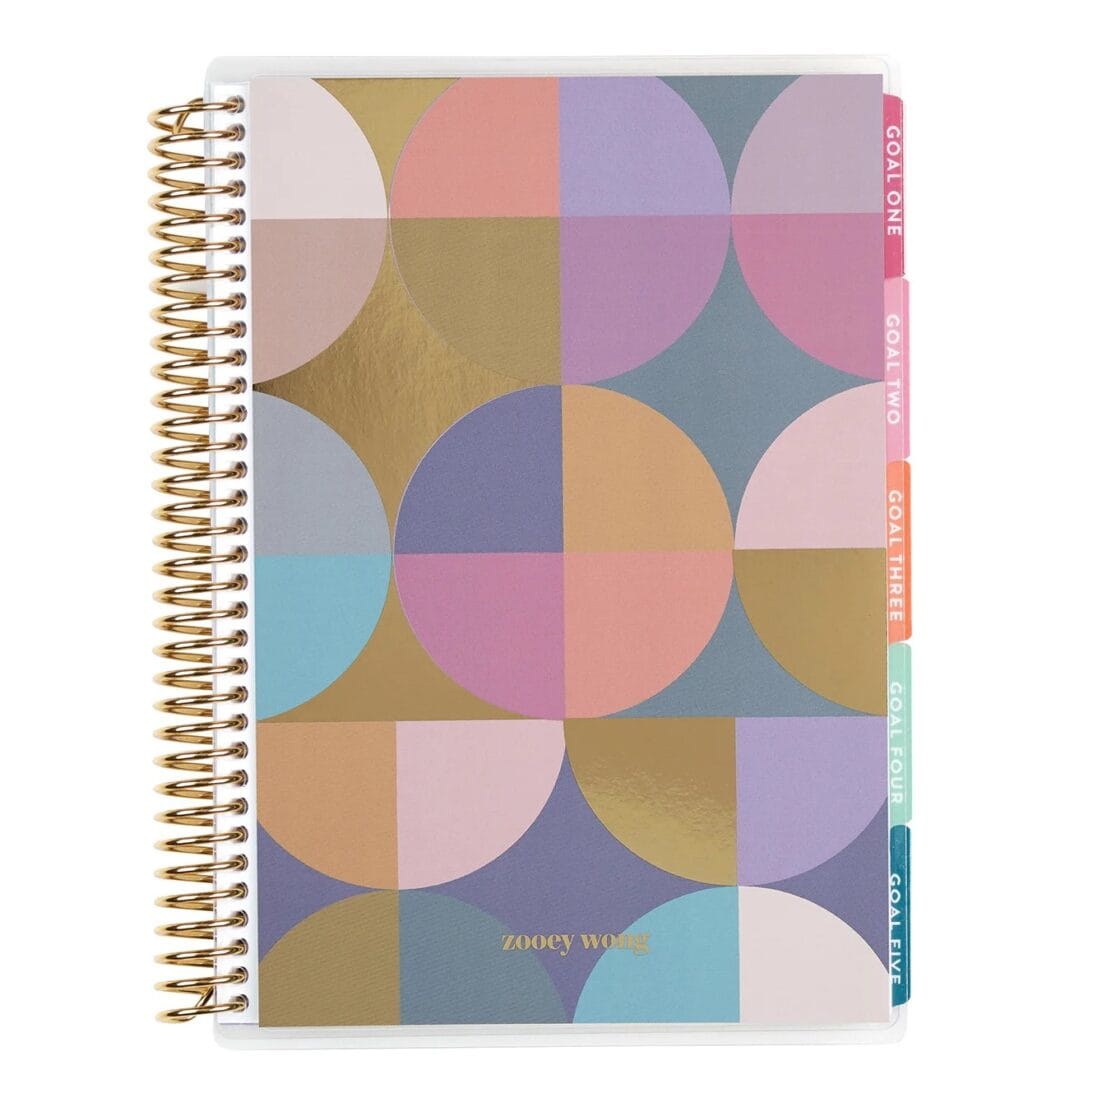 a spiral notebook with circle design on cover